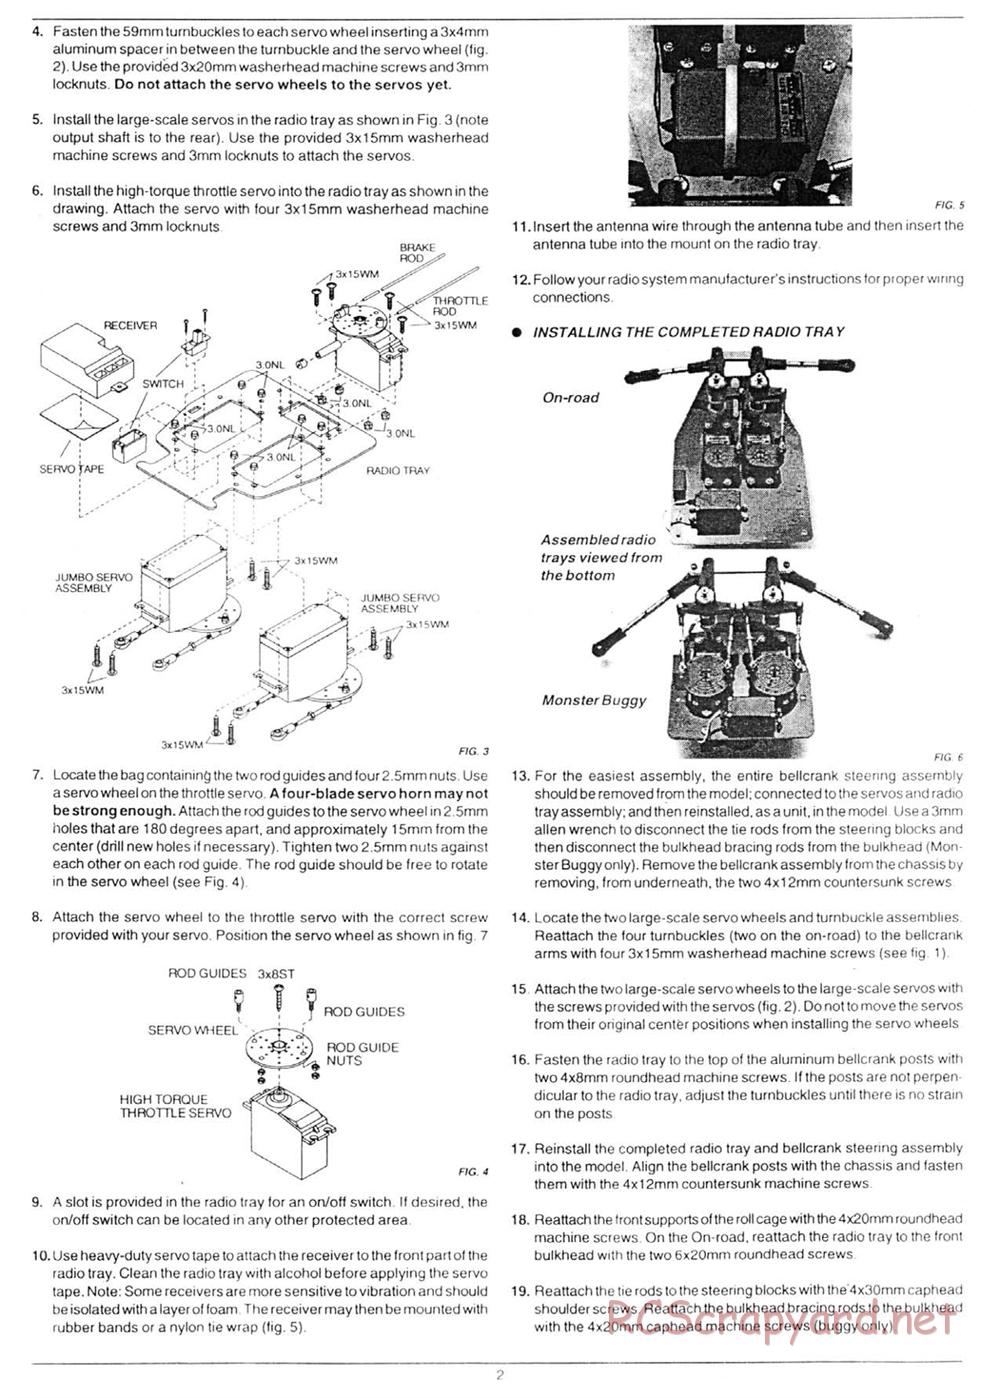 Traxxas - Monster Buggy (Gas Buggy) (1993) - Manual - Page 2